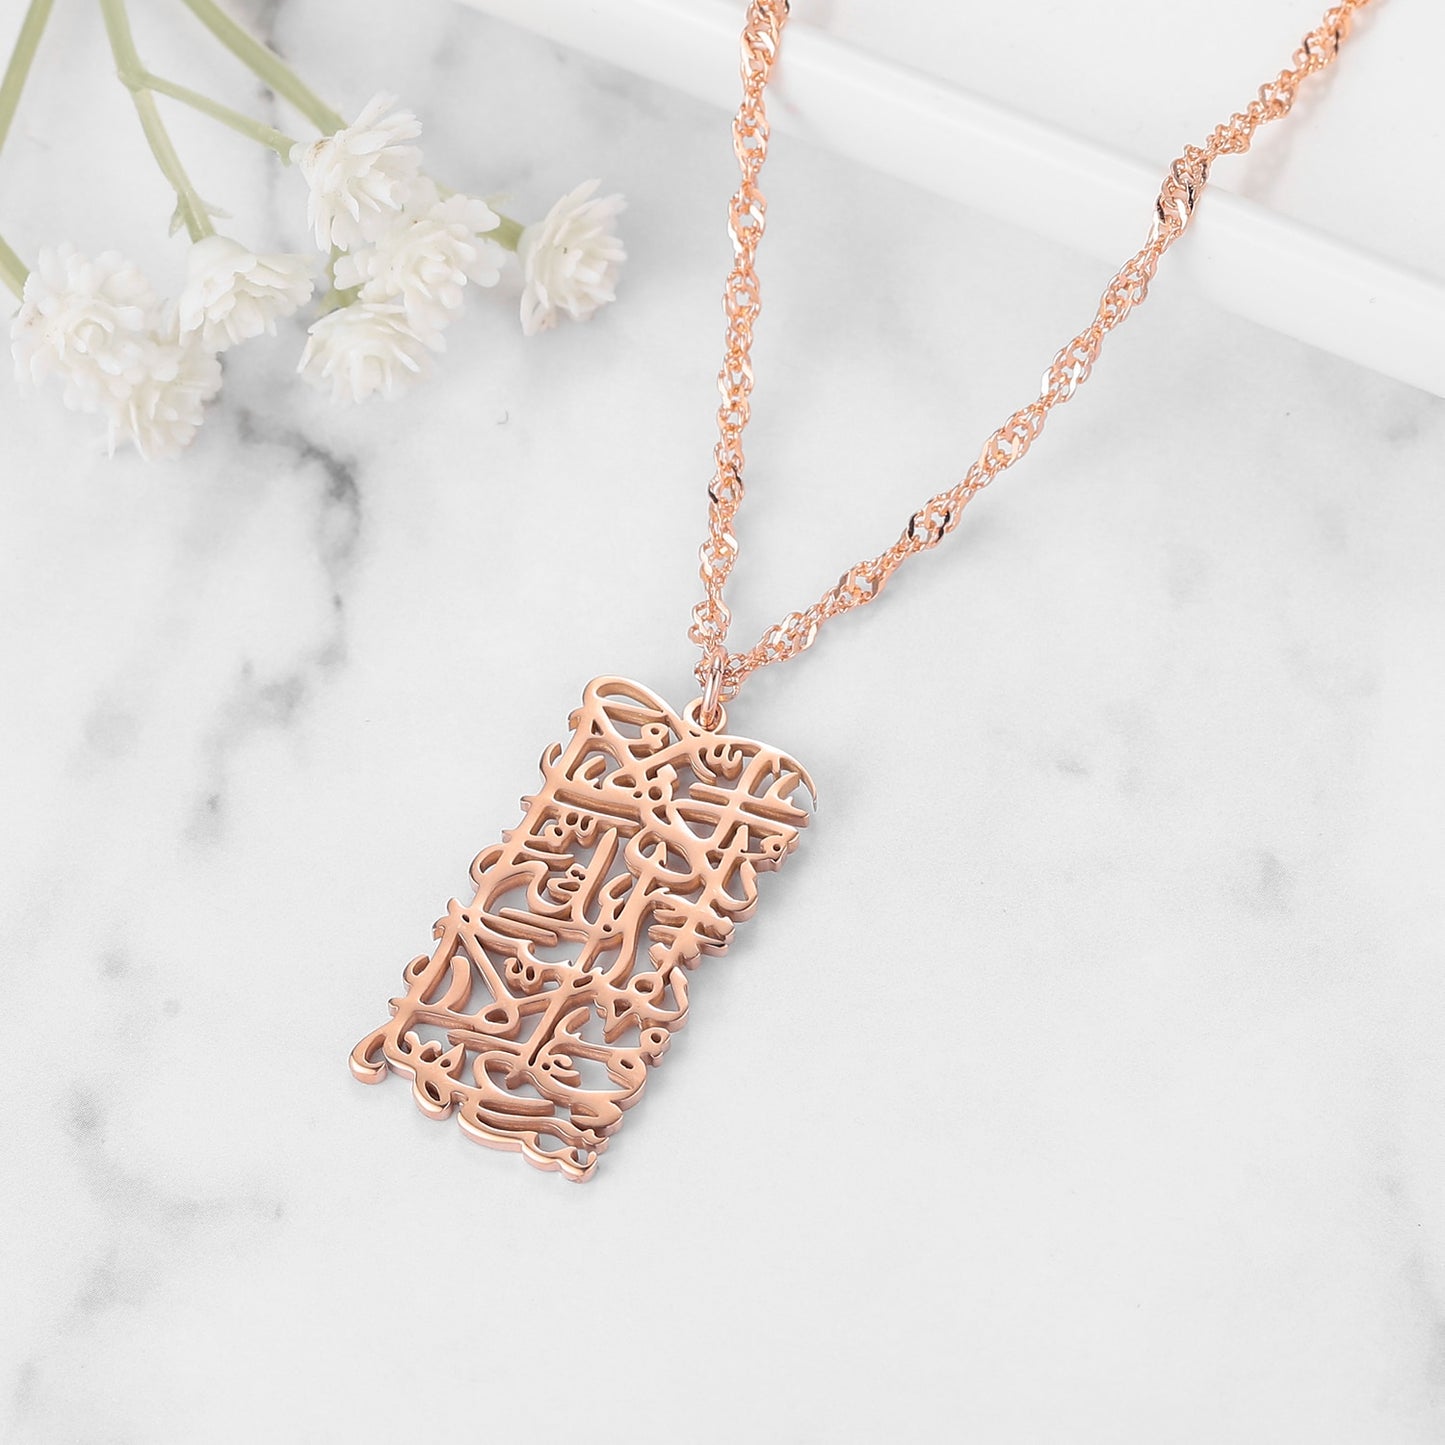 "Allah Does Not Burden A Soul Beyond What It Can Bear" - Calligraphy Necklace